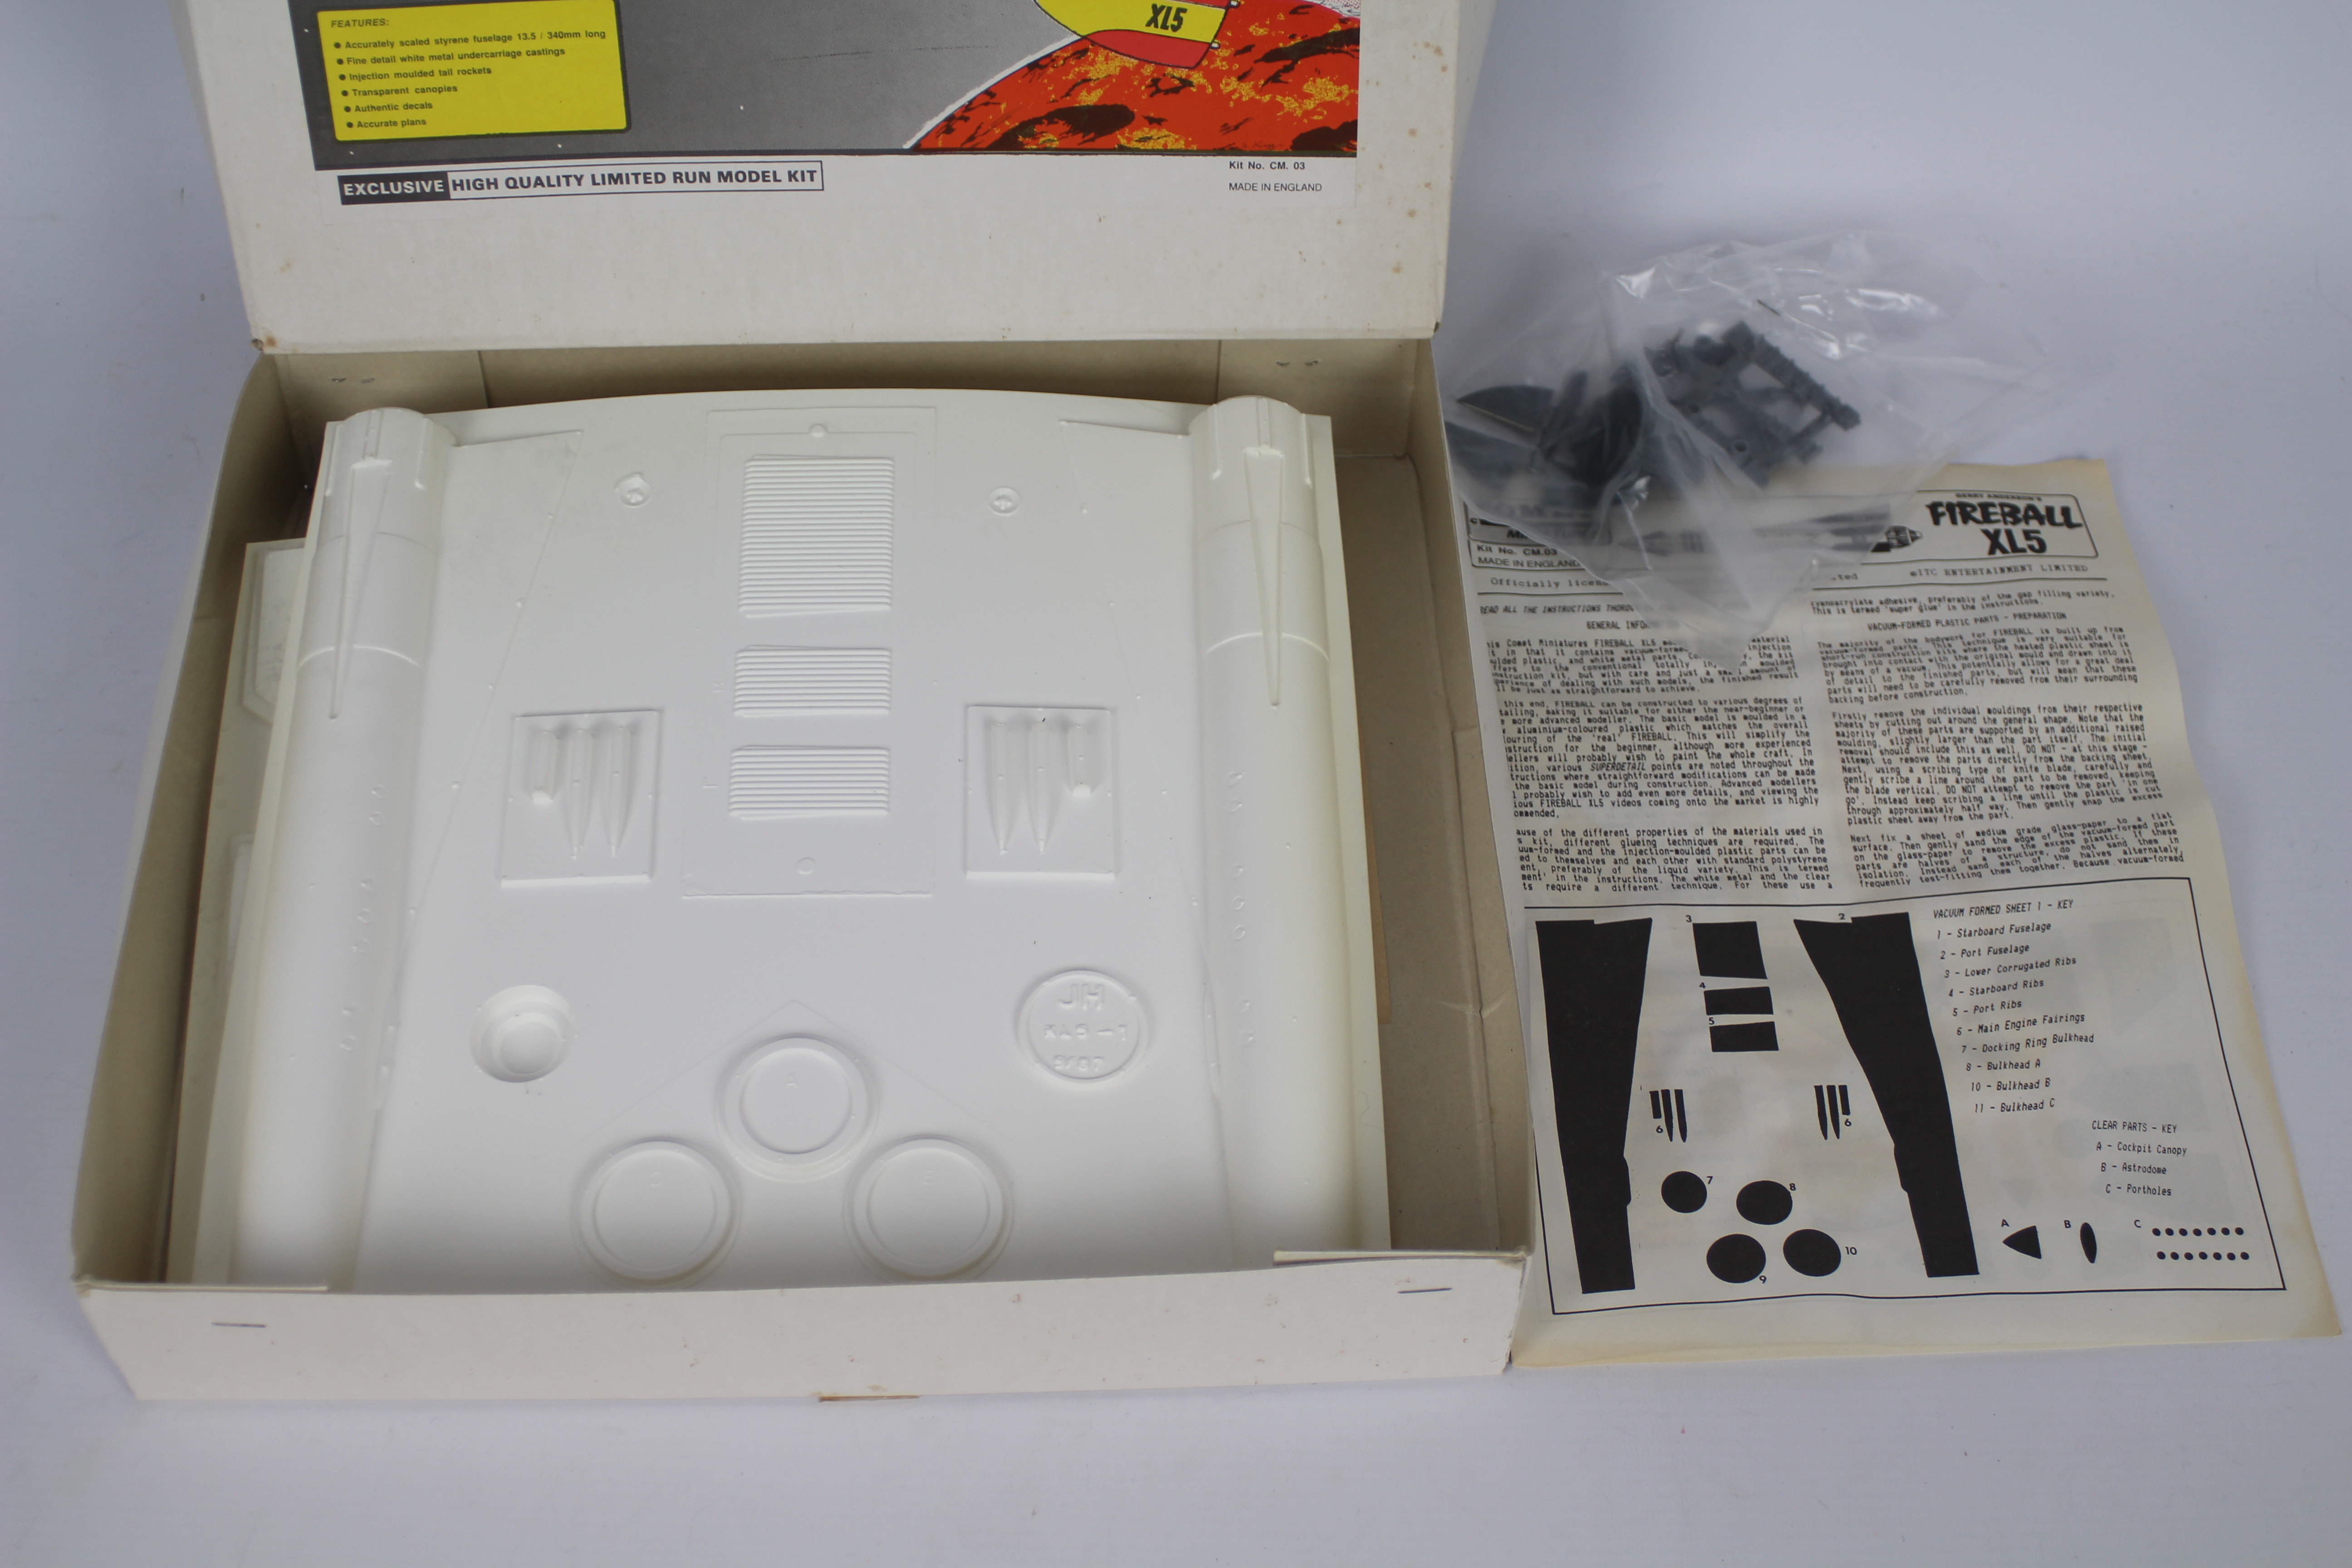 Comet Miniatures - A Gerry Anderson boxed Comet Miniatures CM. - Image 2 of 3